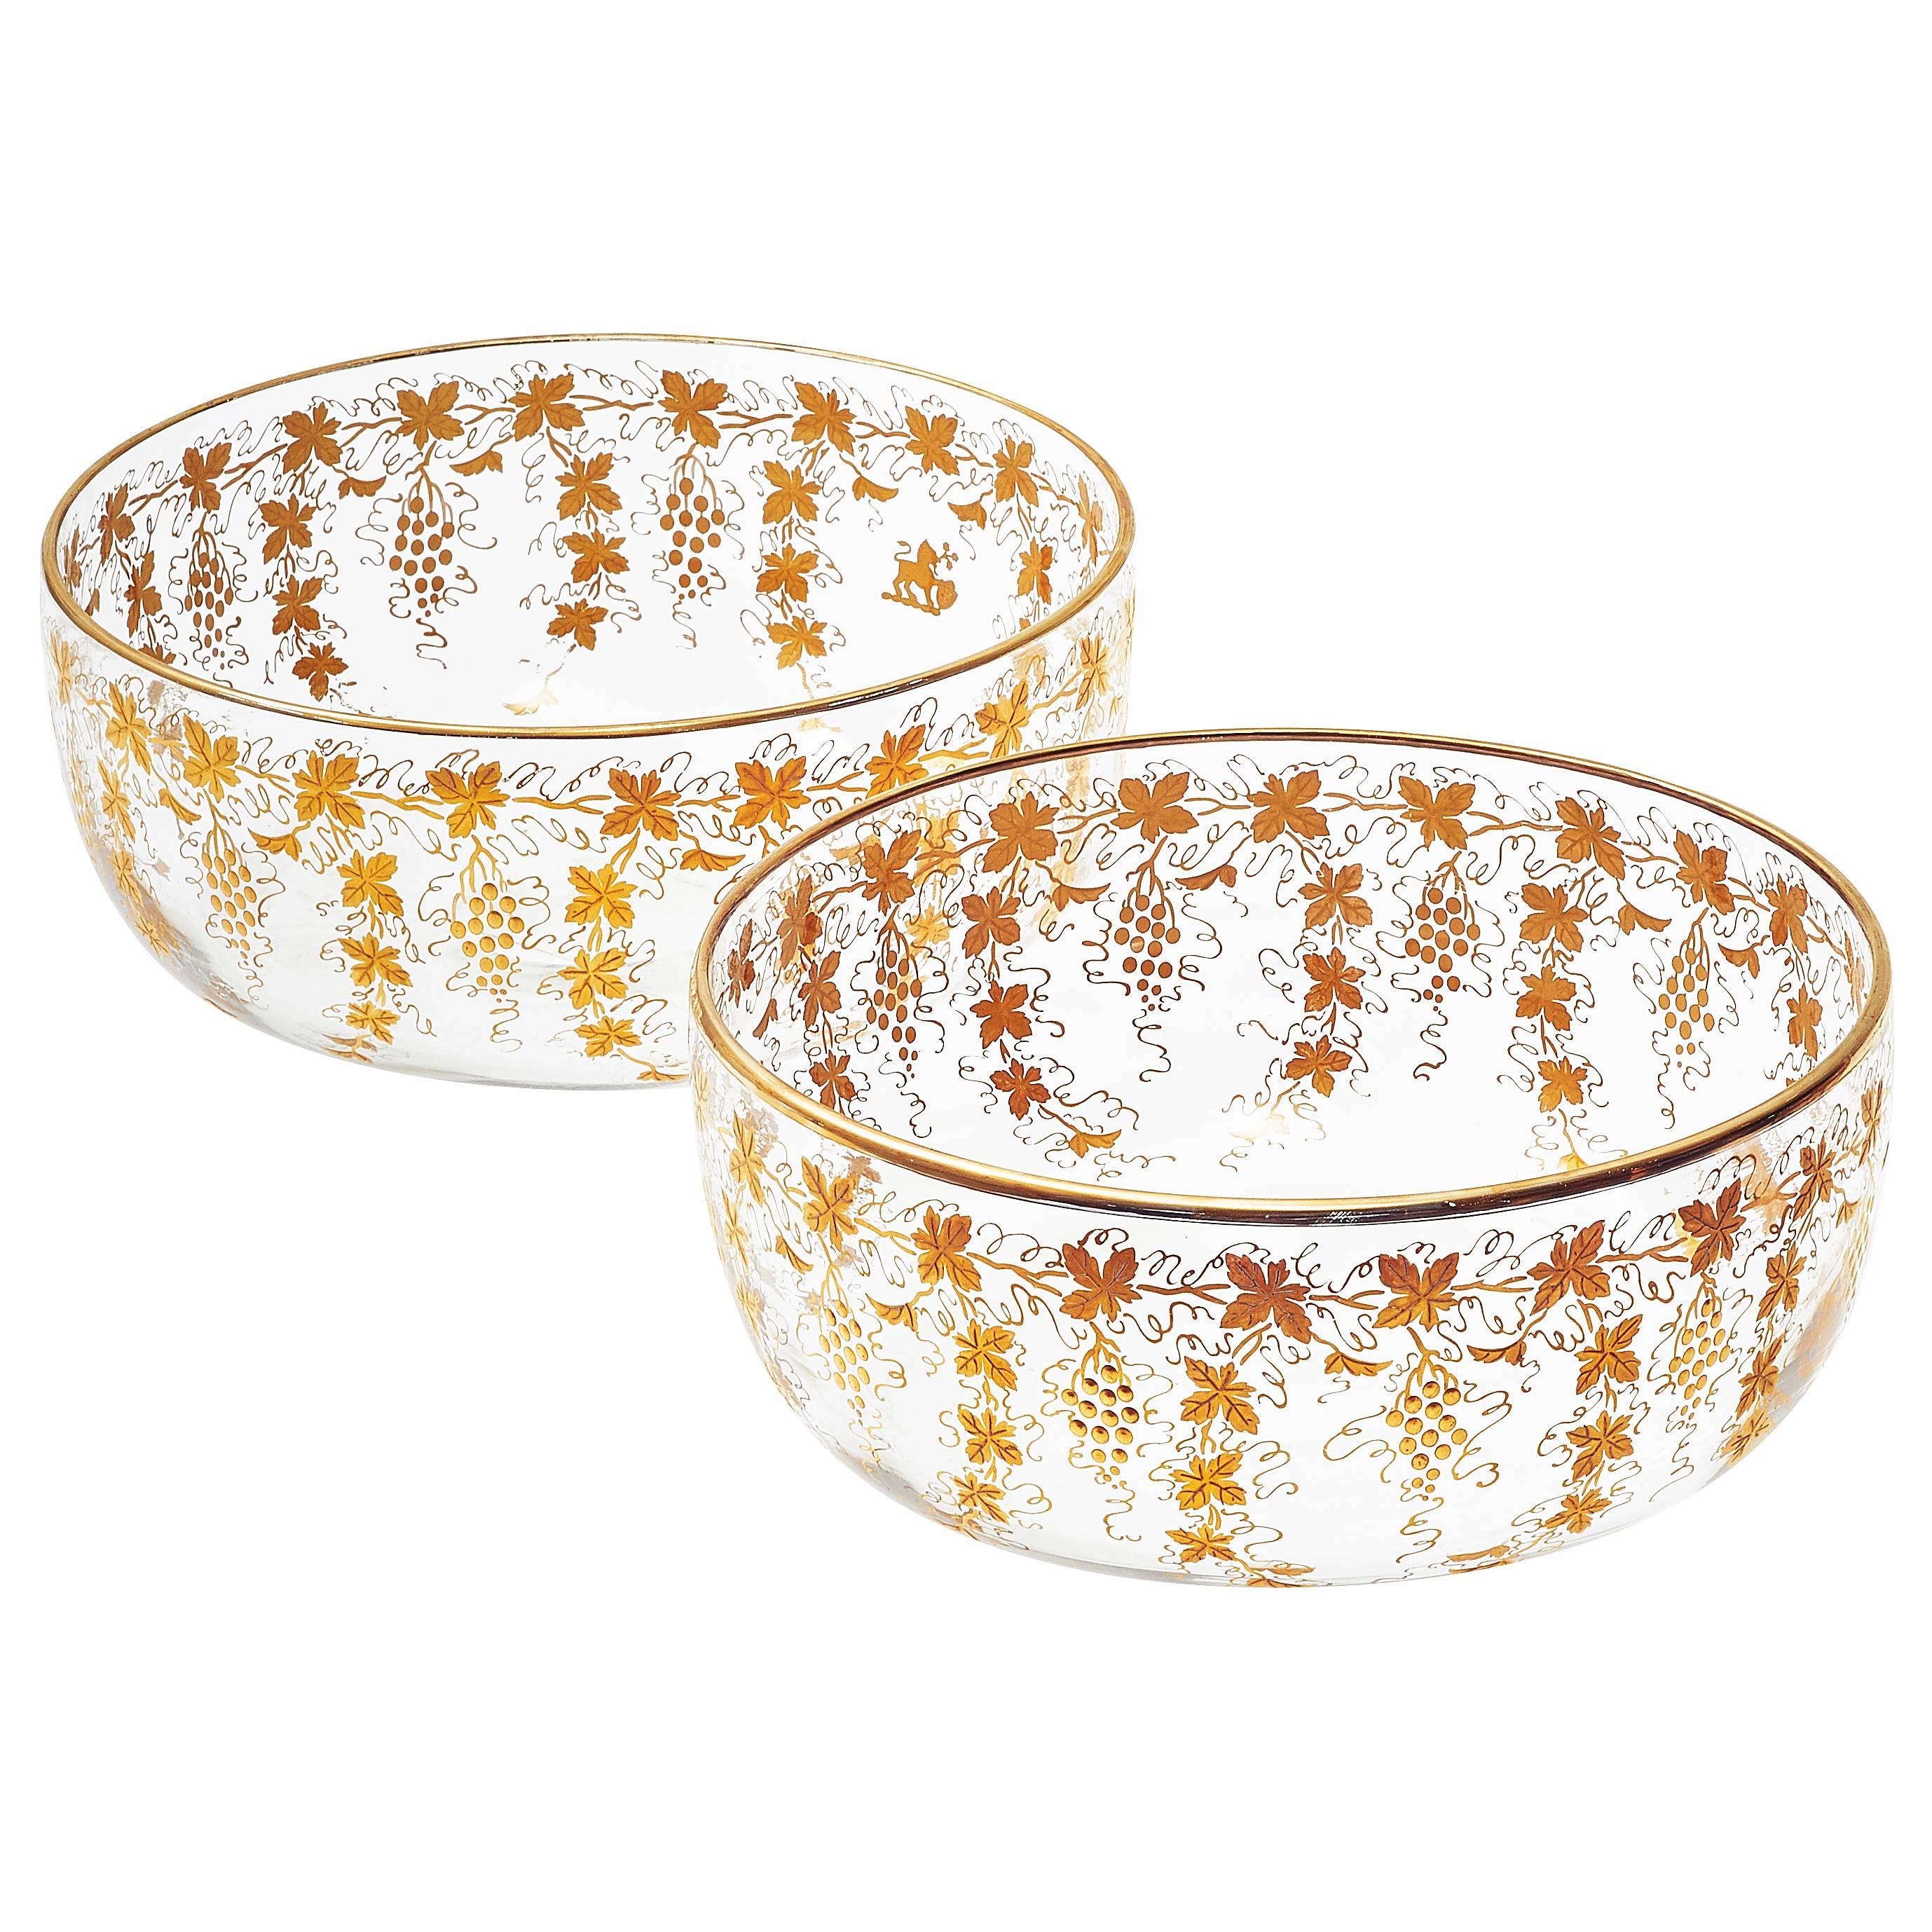 Pair of English Crystal Glass Bowls with Gilt Decoration c.1910